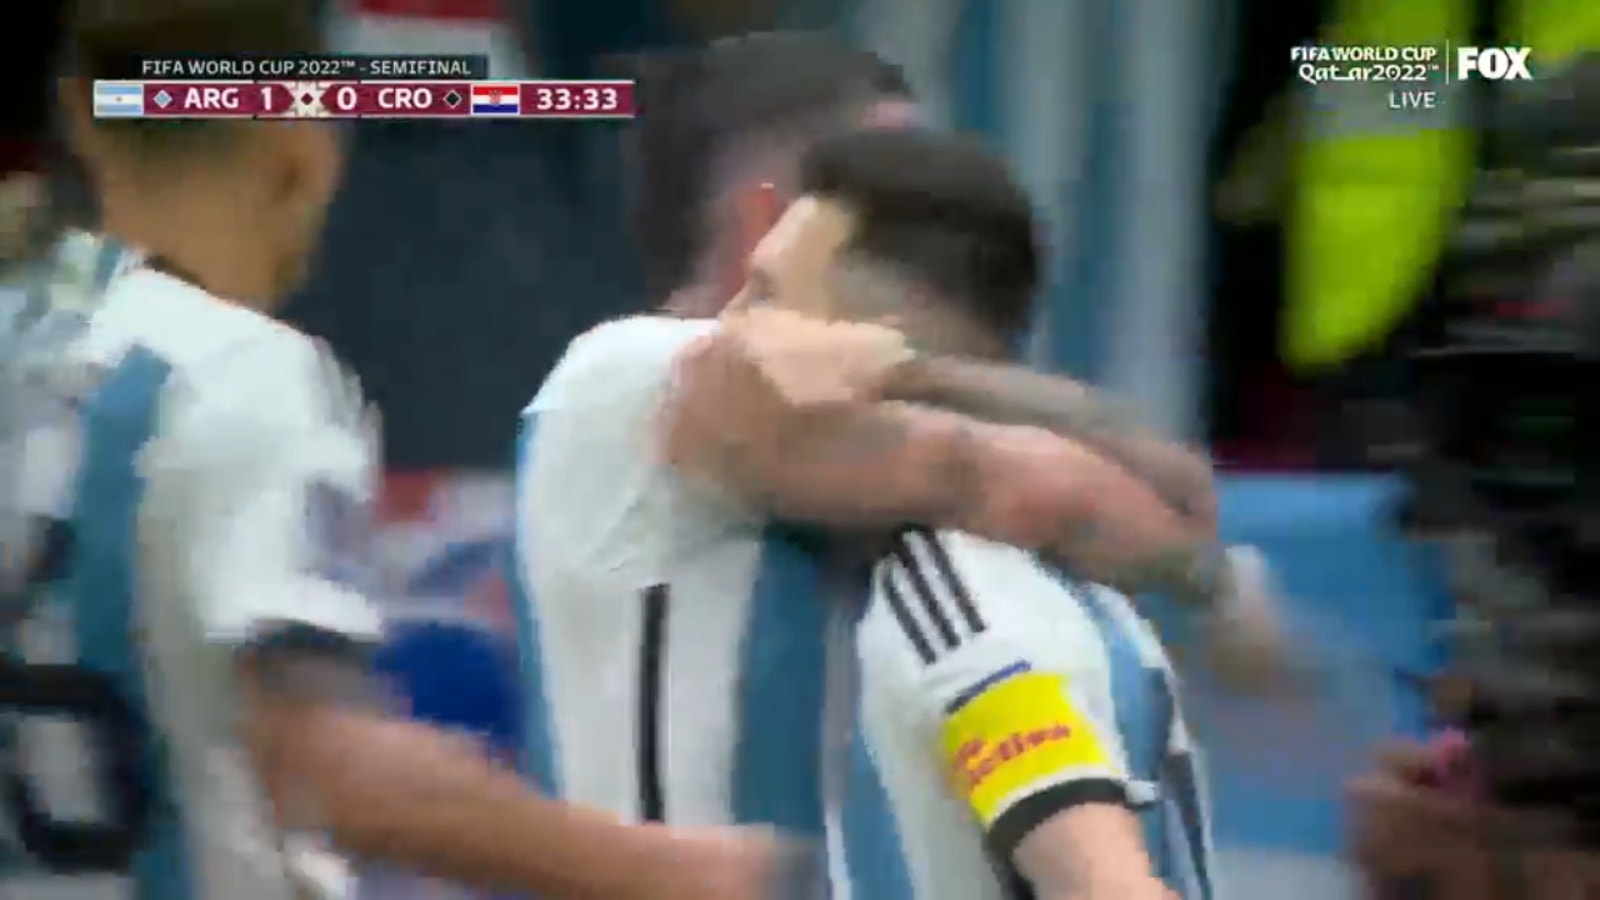 Lionel Messi and Julián Álvarez scored to give Argentina a 2-0 lead over Croatia |  FIFA World Cup 2022